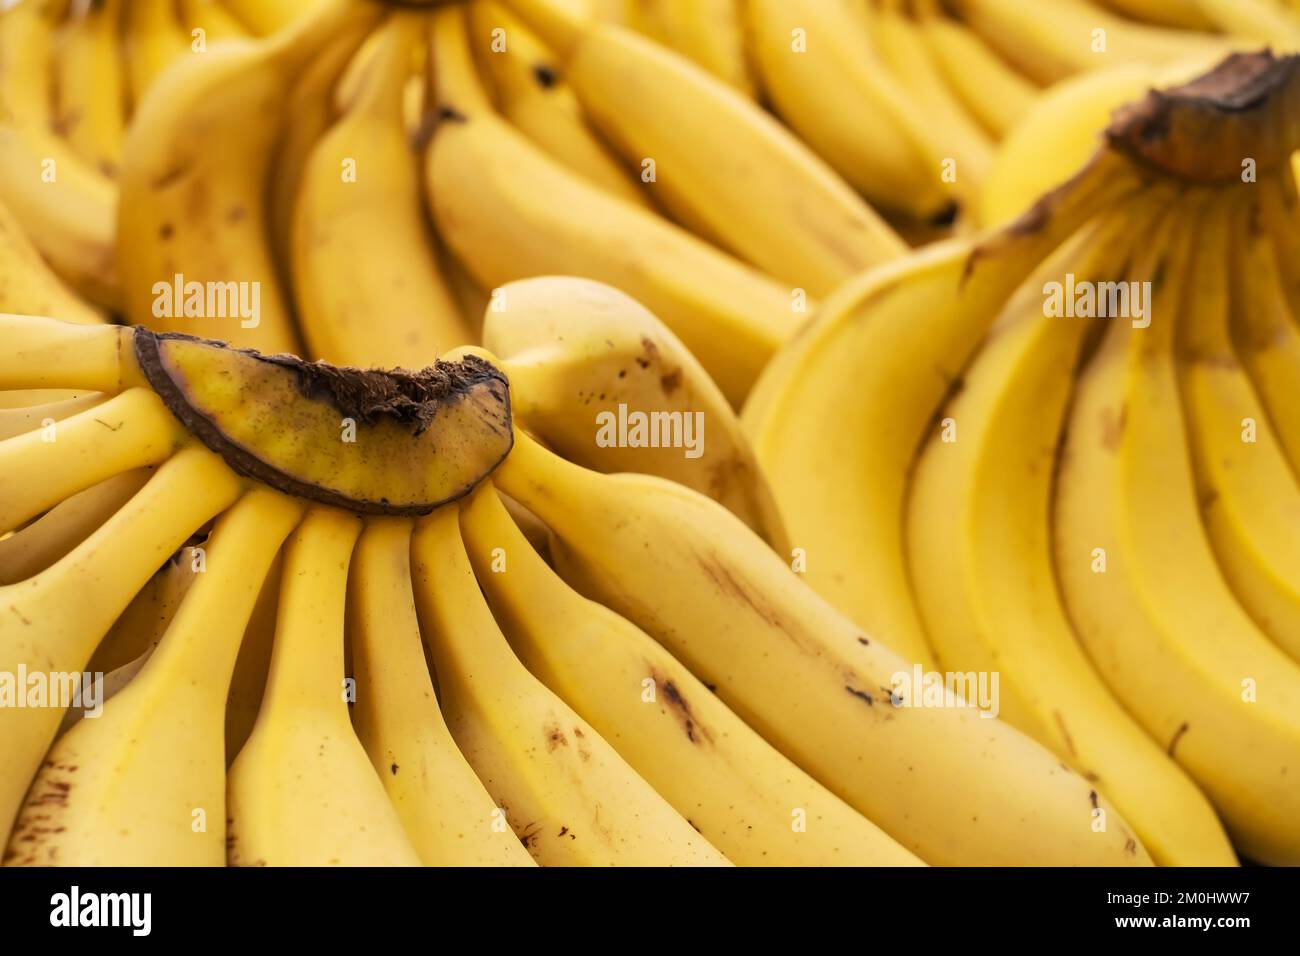 Bunch of ripened bananas at grocery store Stock Photo